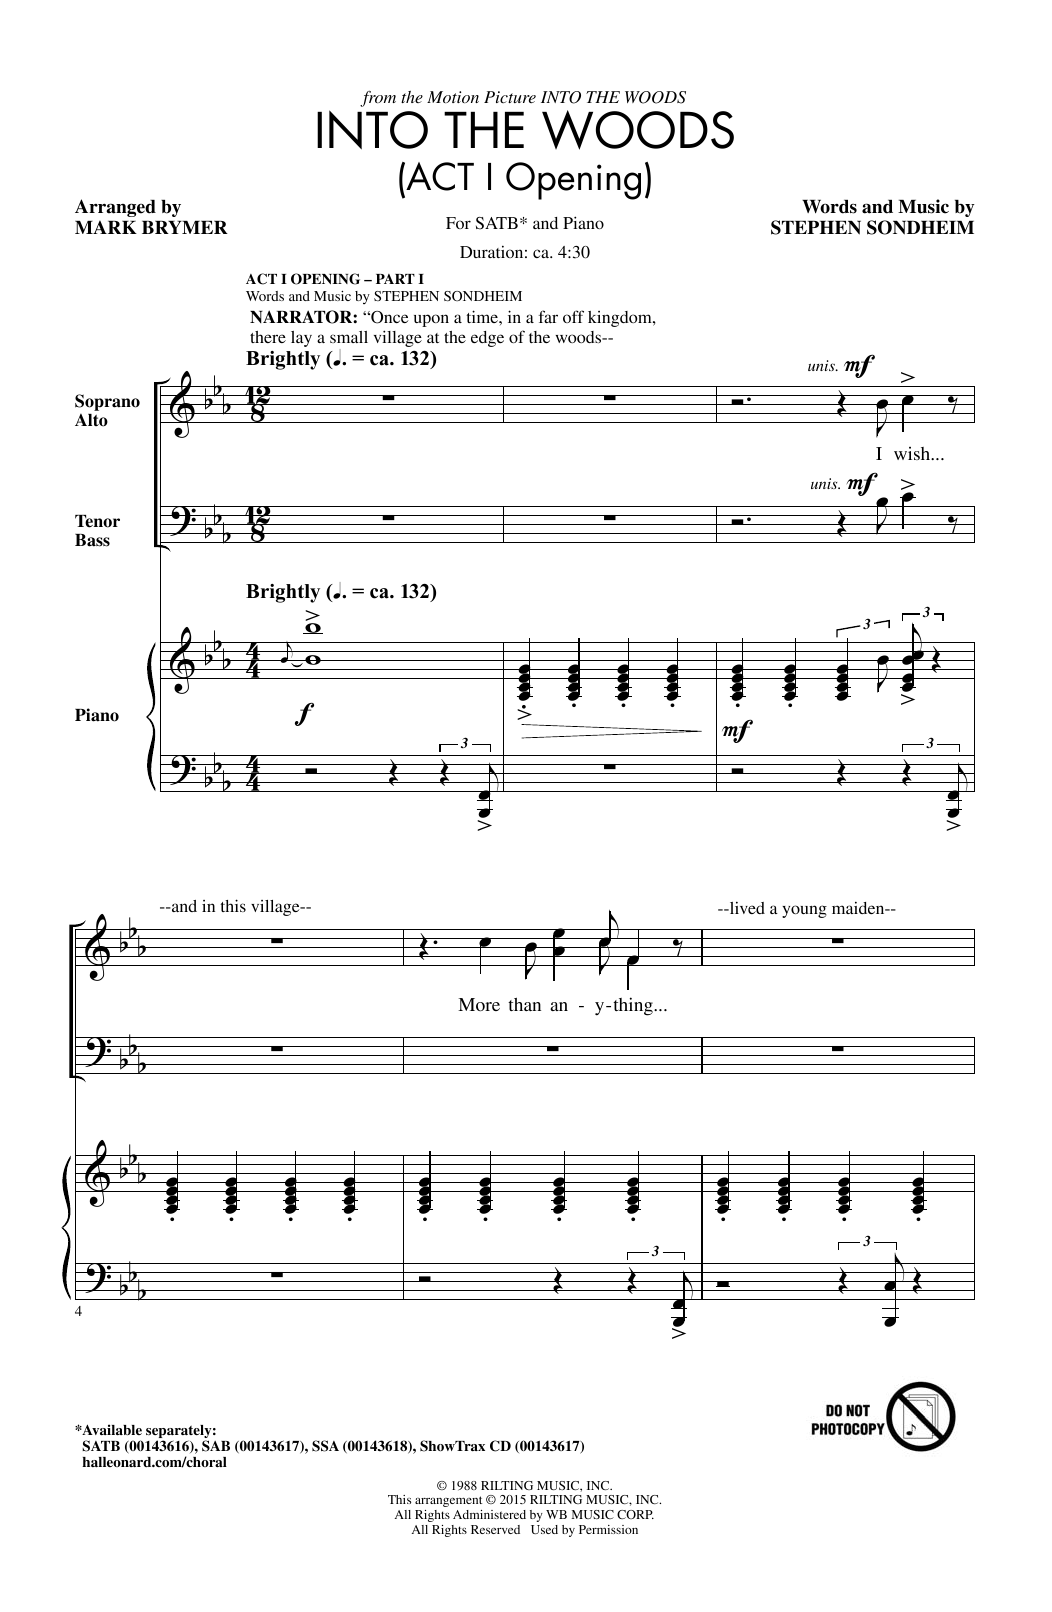 Download Stephen Sondheim Into The Woods (Act I Opening) - Part I Sheet Music